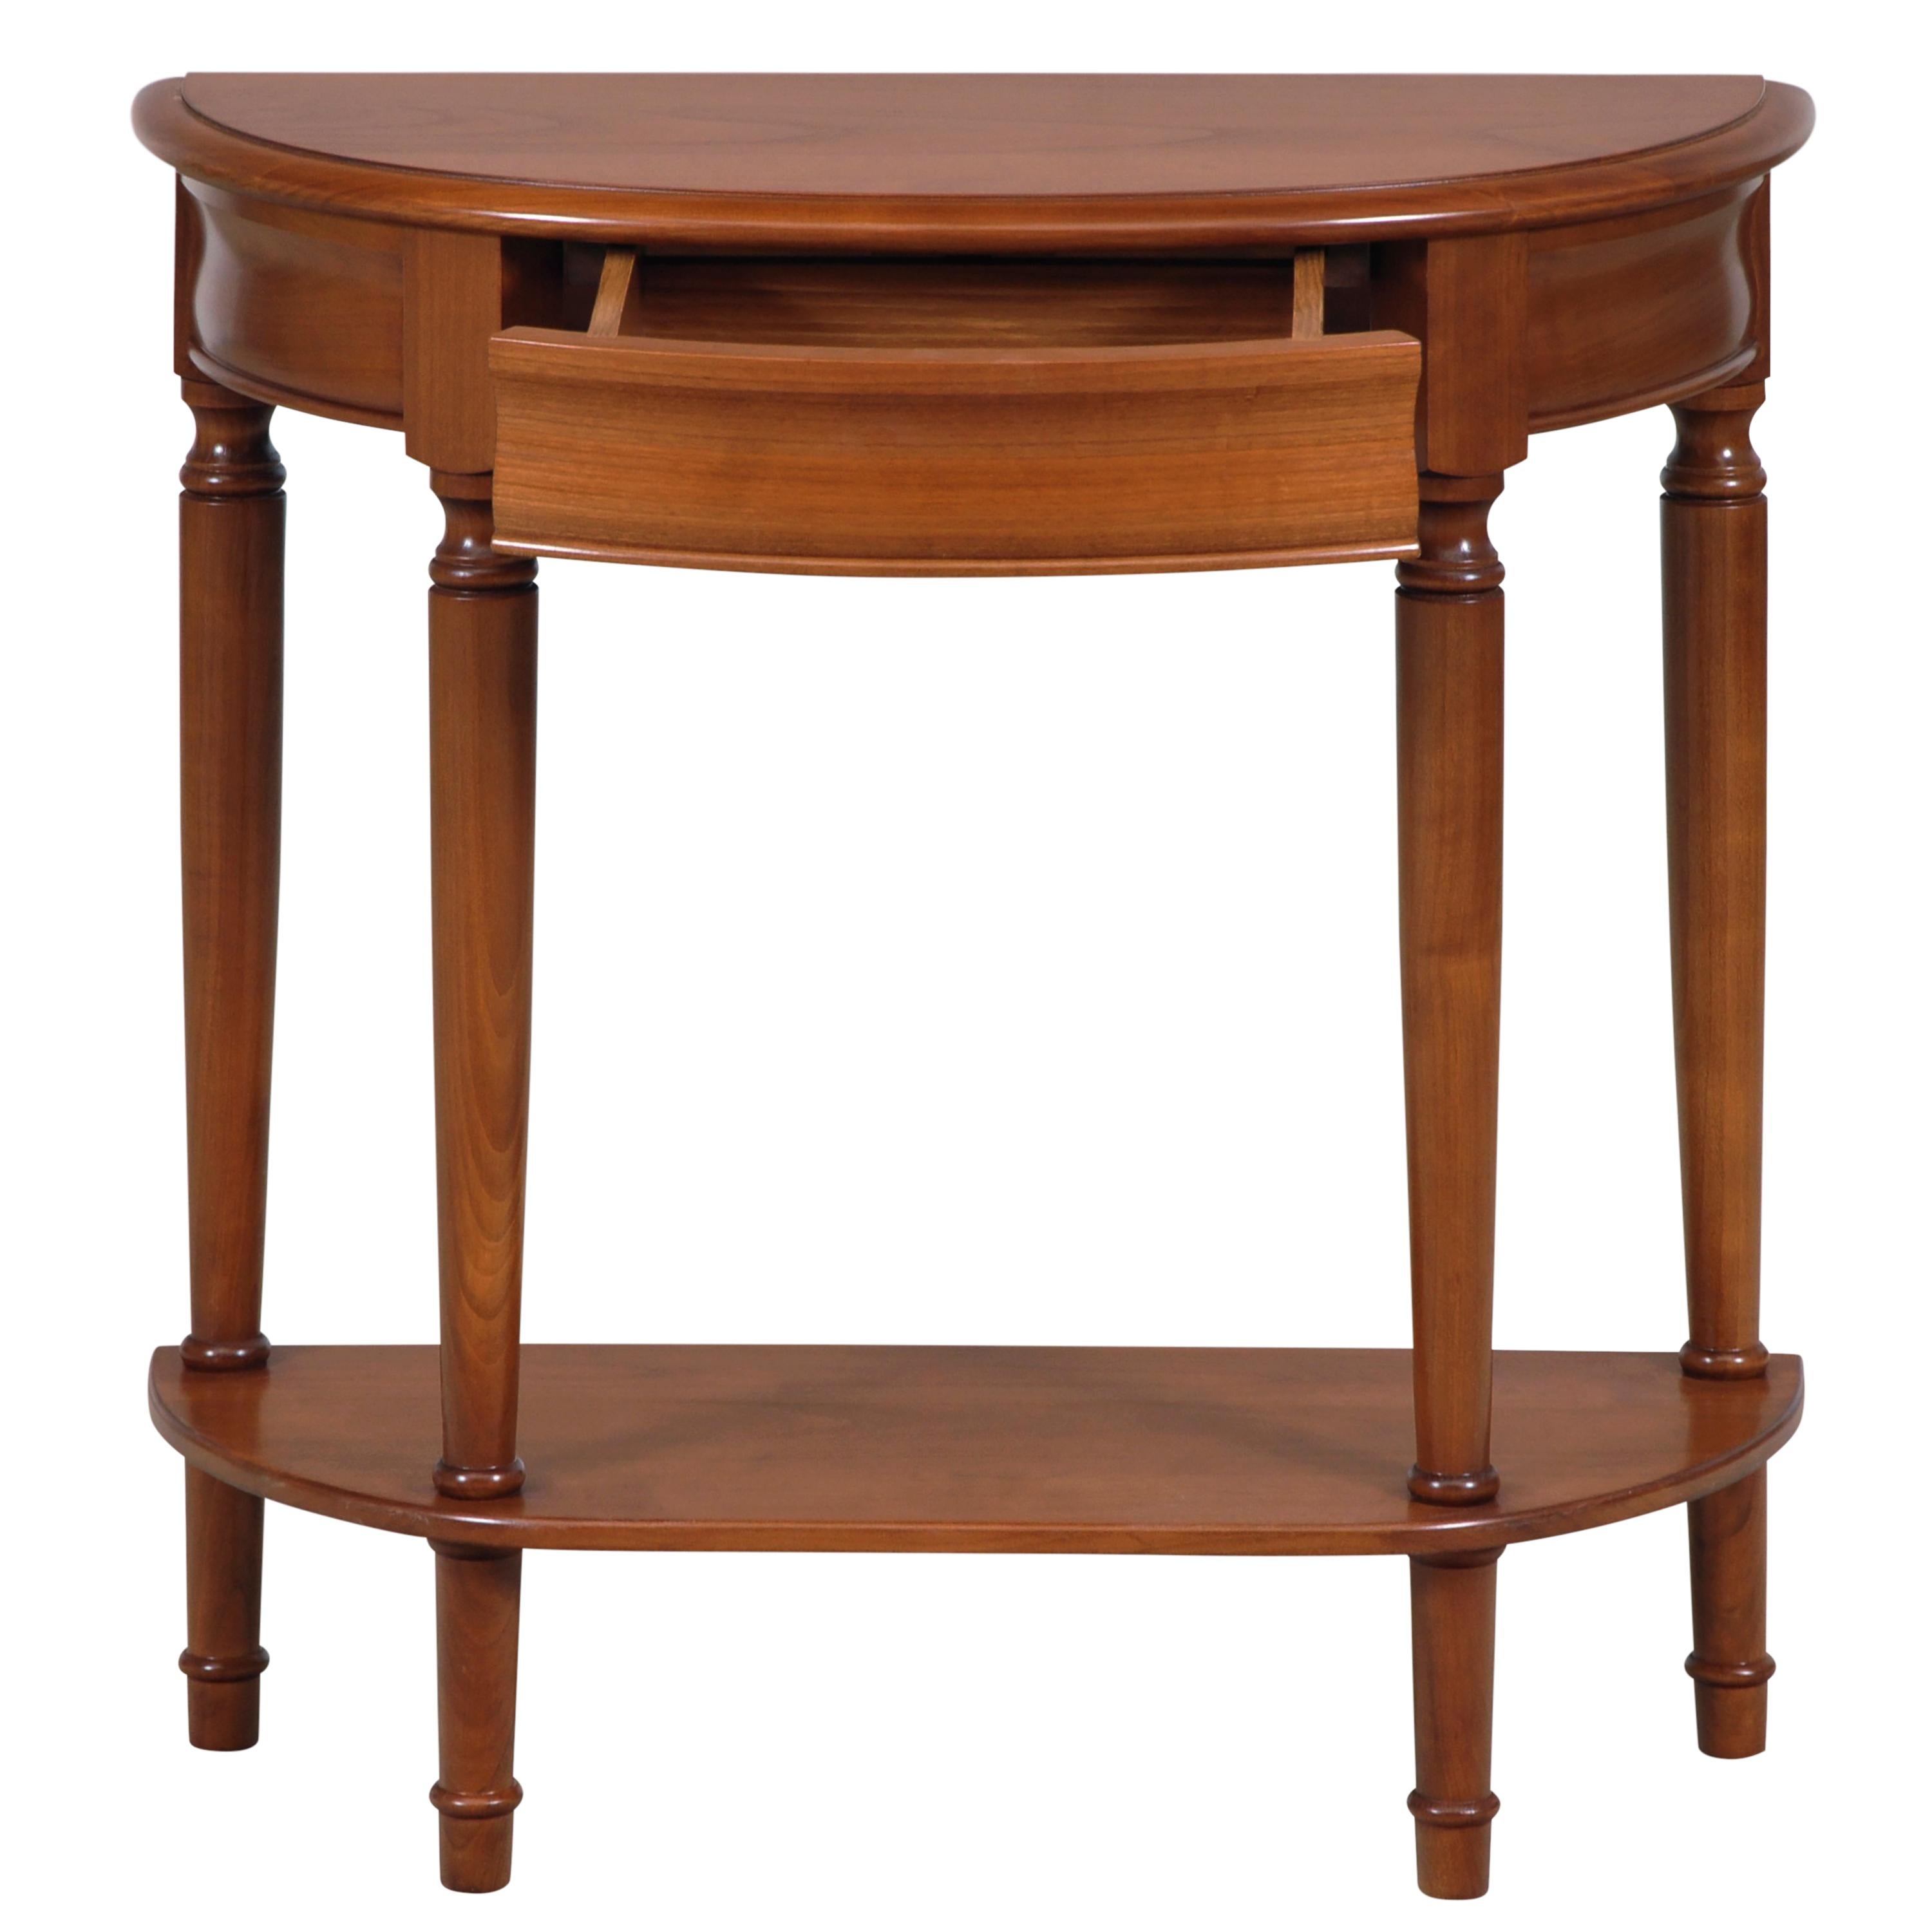 This half moon console table is a handmade reproduction of the French Louis Philippe Style in the mid 19th century in France caracterized by its curved moldings, hand-curved feet and rounded design.

1 Drawer is integrated n the curved molding.
1